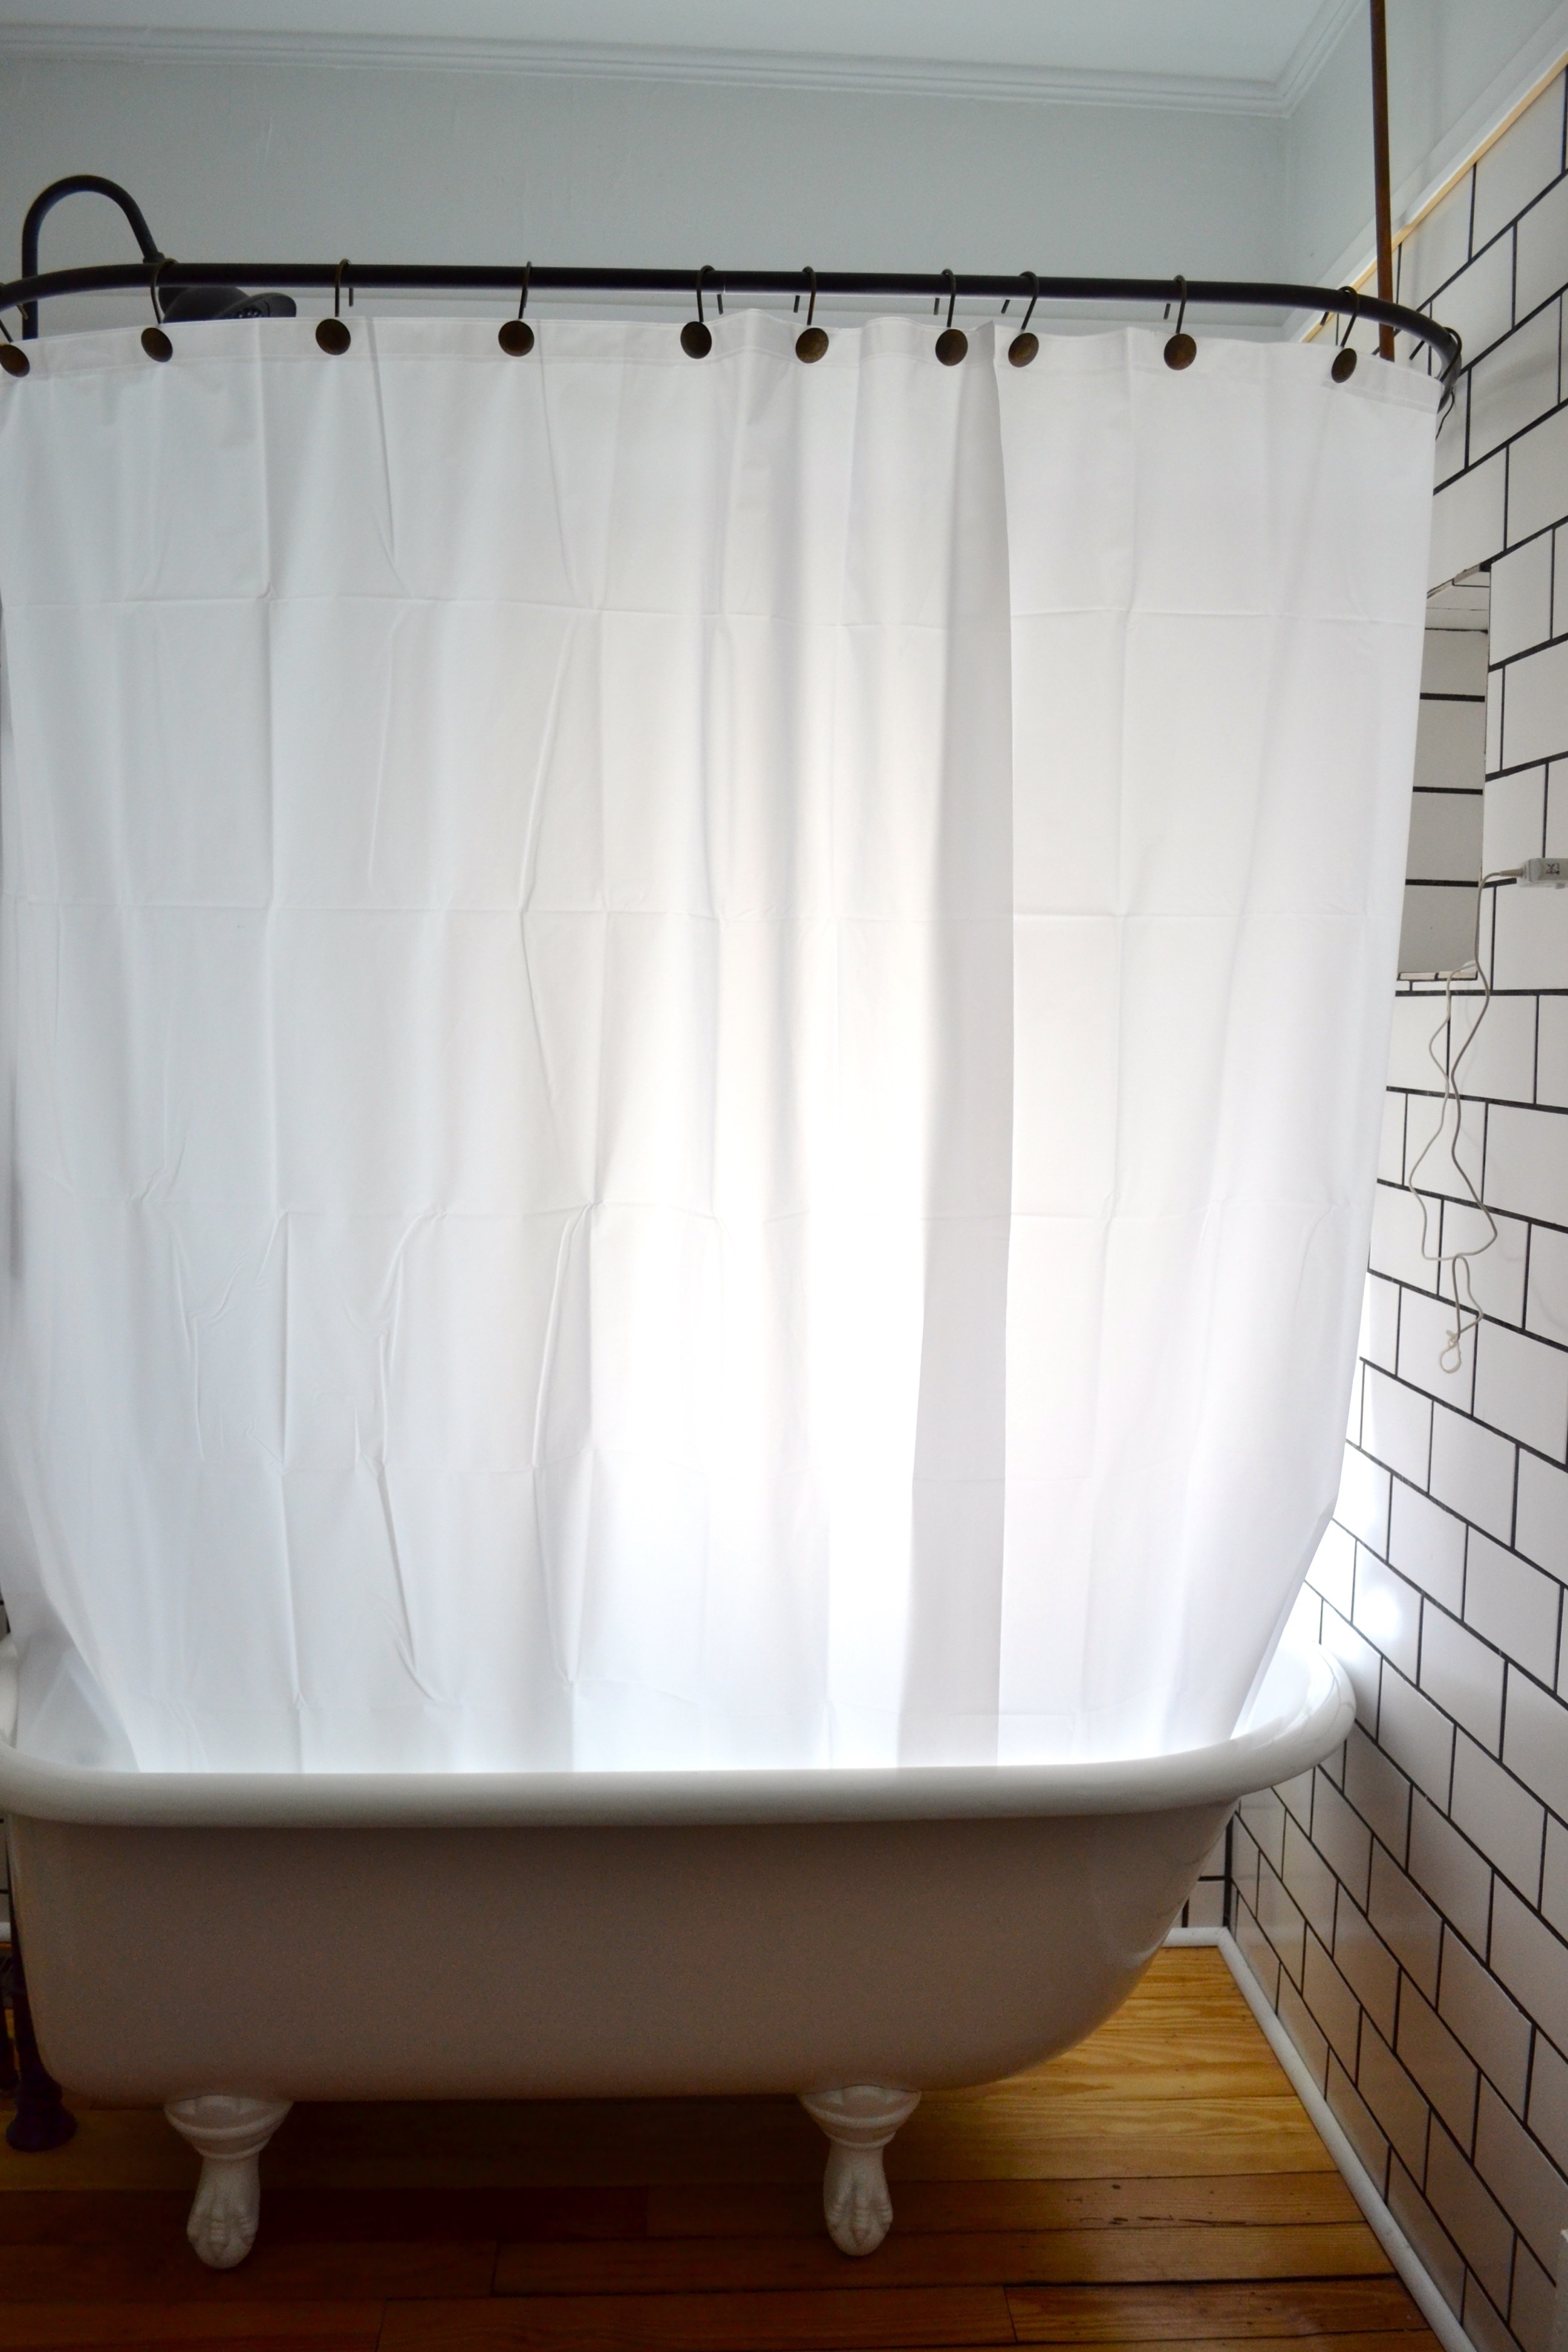 Clawfoot Tub Shower Curtain Liner, Do You Need A Special Shower Curtain For Clawfoot Tub